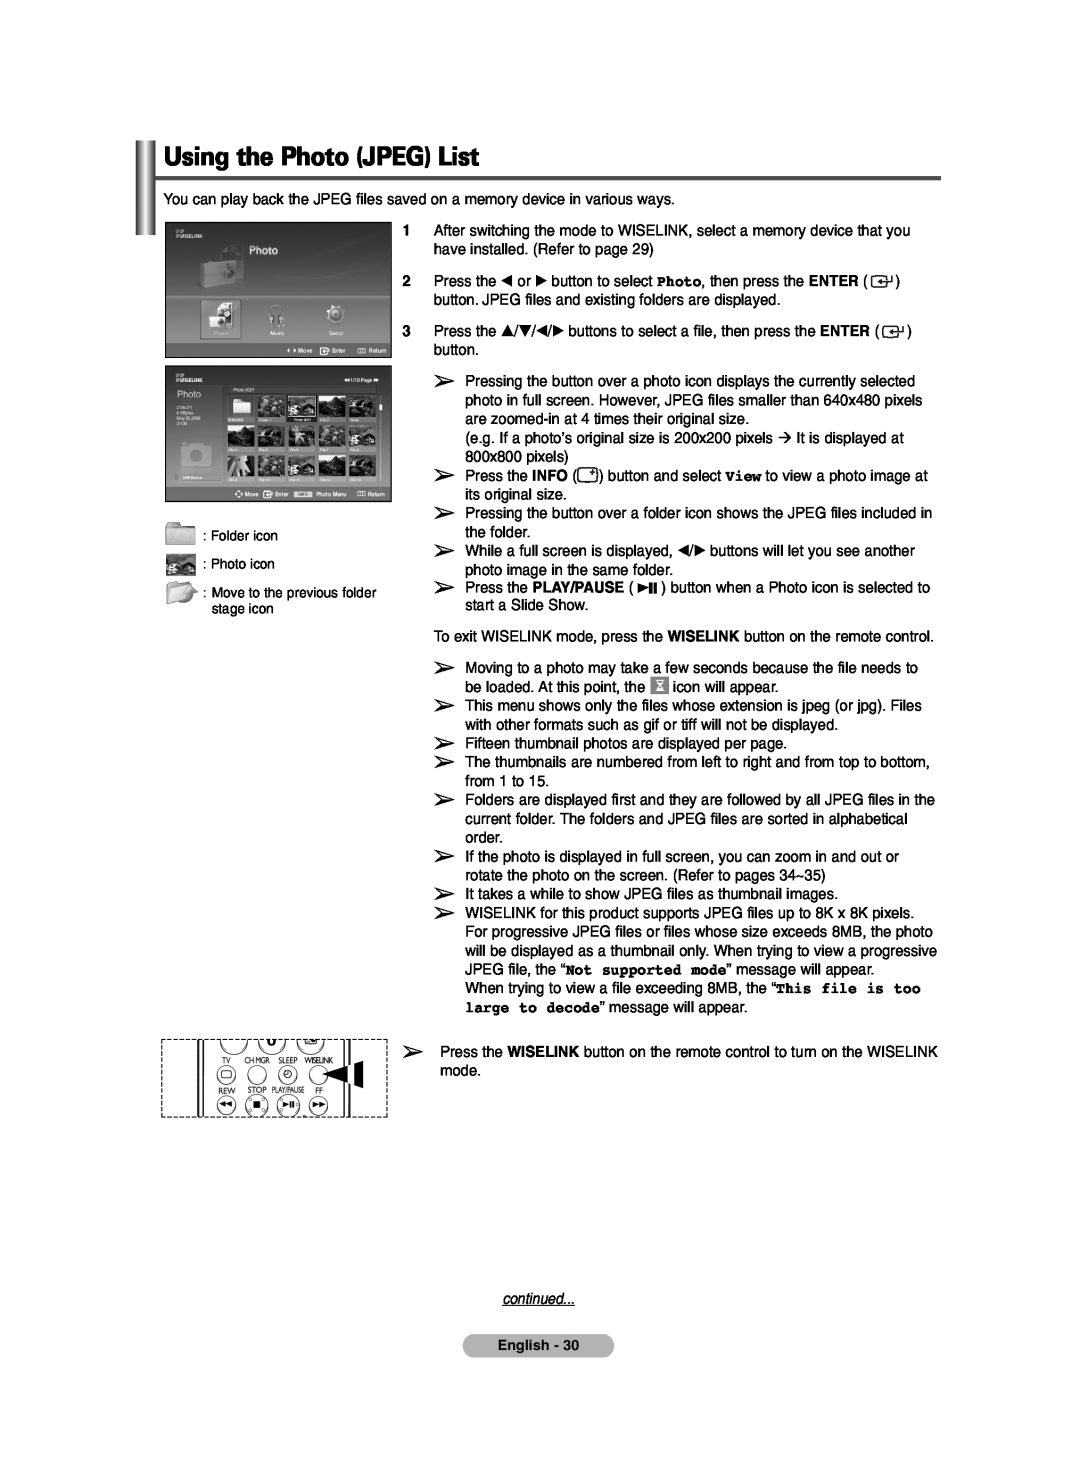 Samsung PDP-TELEVISION manual Using the Photo JPEG List, continued, its original size 